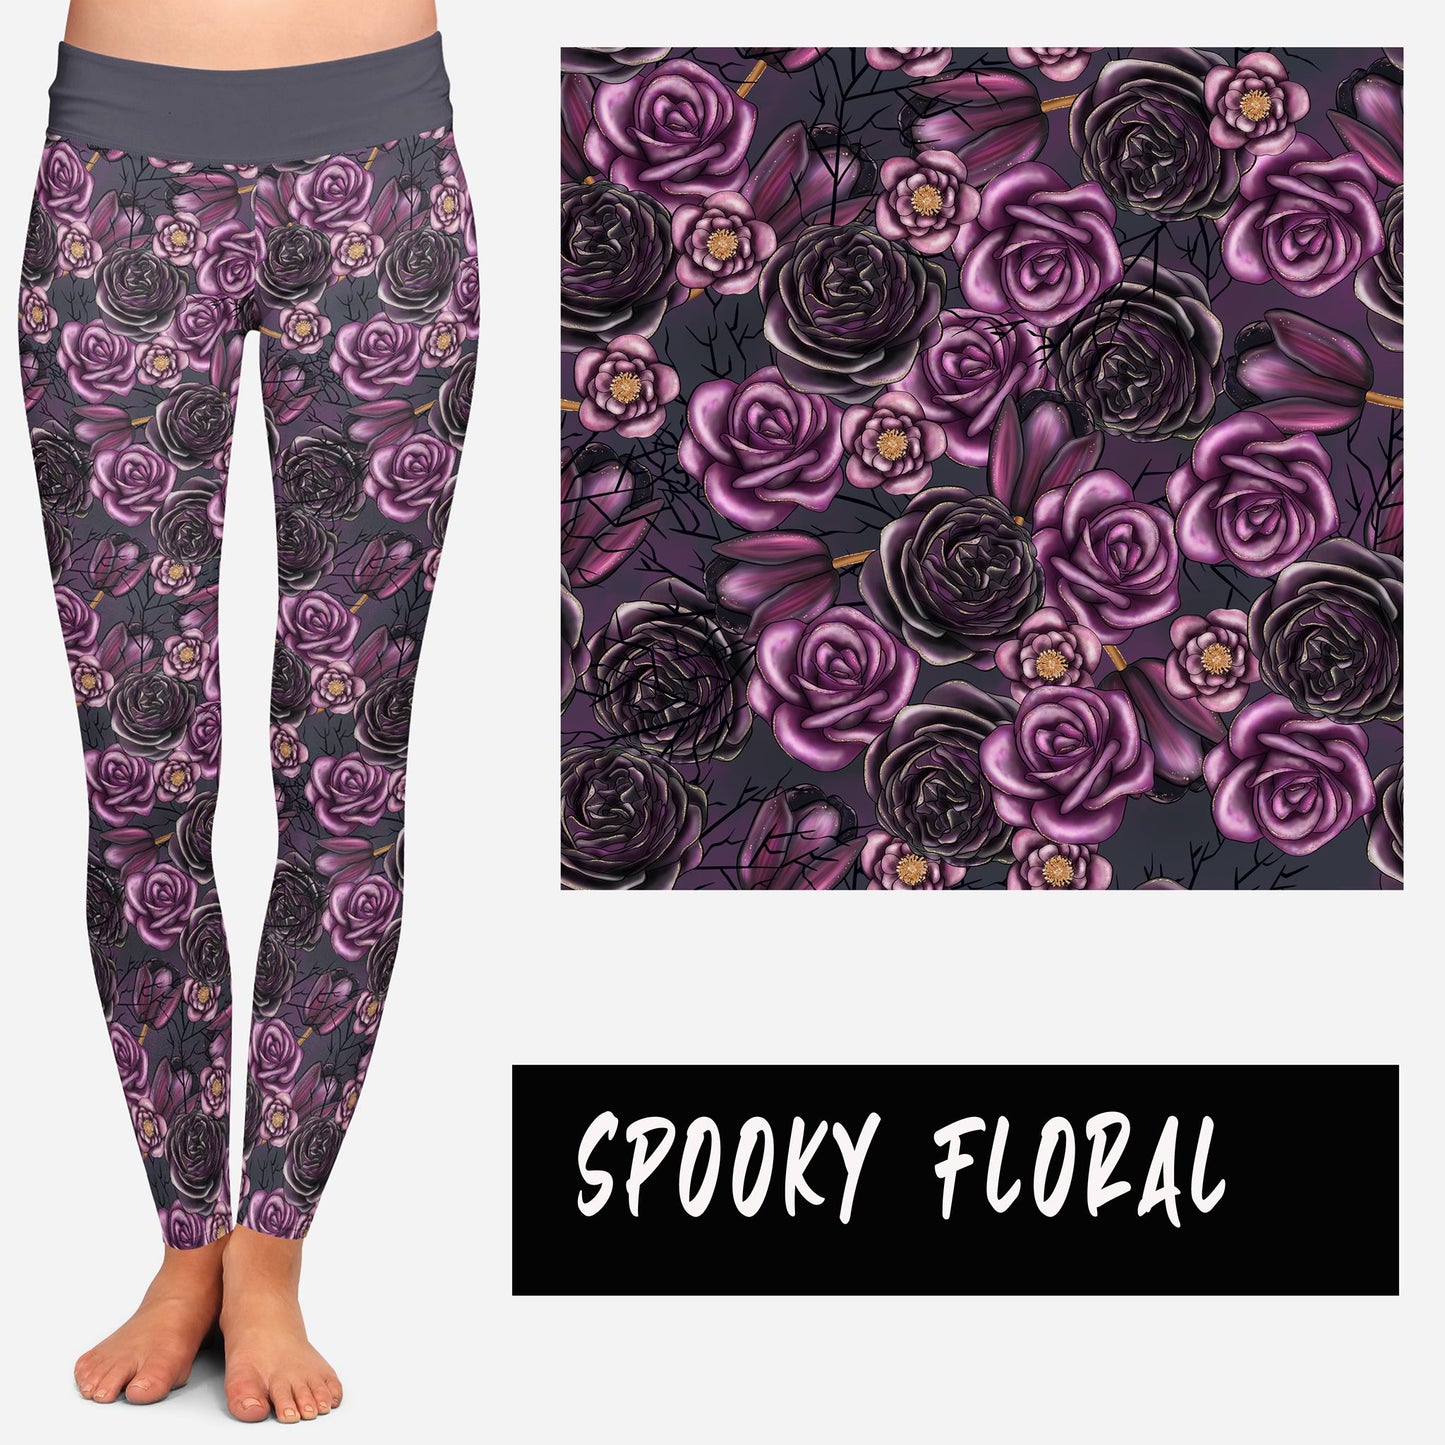 SPOOKY FLORAL